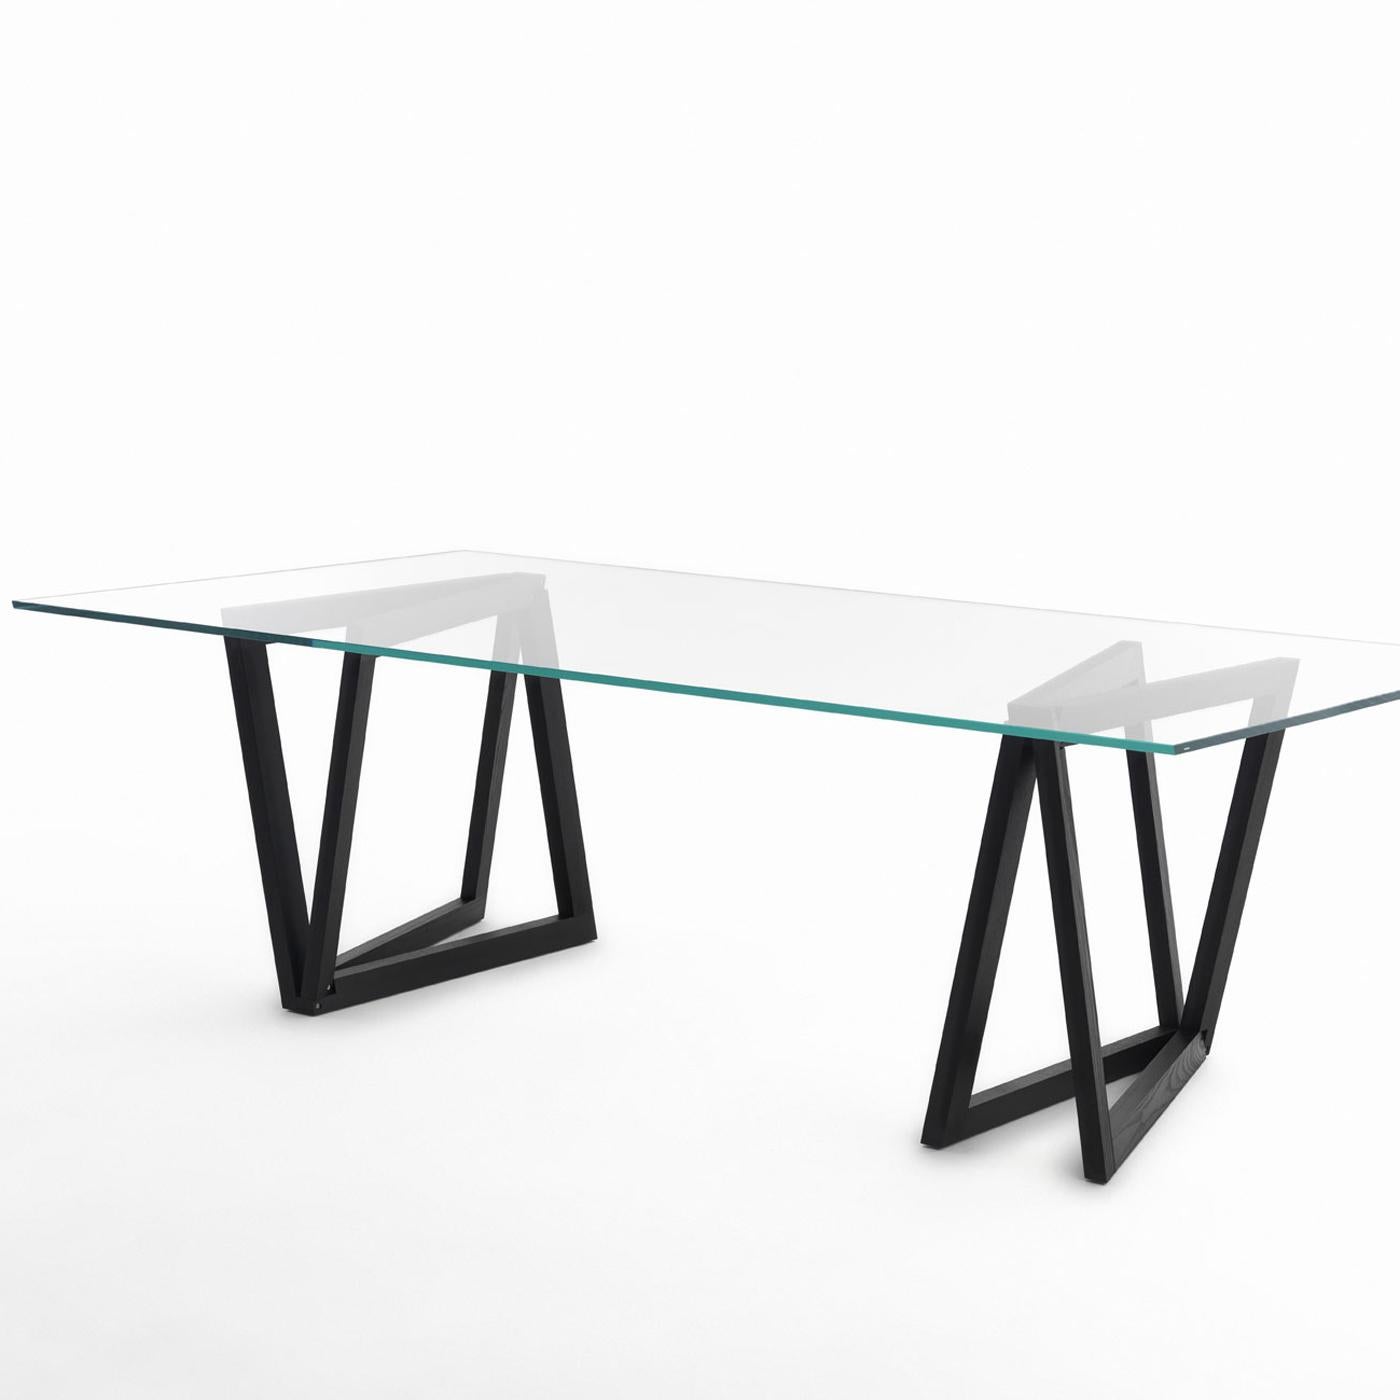 This dining table is a sculptural objet d'art designed by Dror. A unique and innovative piece of functional decor, it comprises two metal legs composed of two L shapes intersecting each other, skillfully cut and combined to create robust and